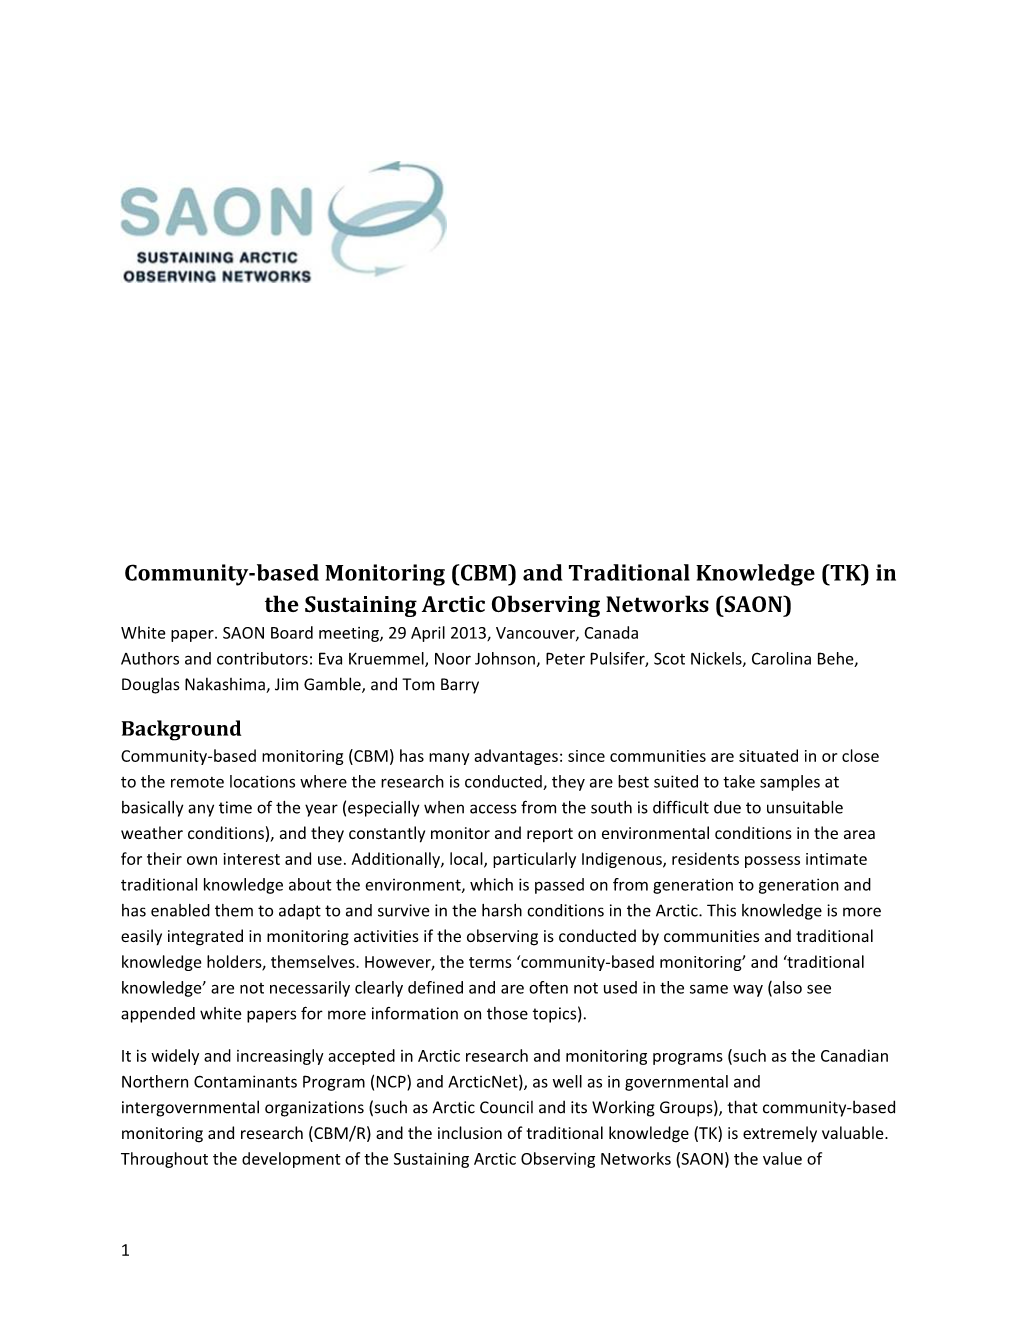 Community-Based Monitoring (CBM) and Traditional Knowledge (TK) in the Sustaining Arctic